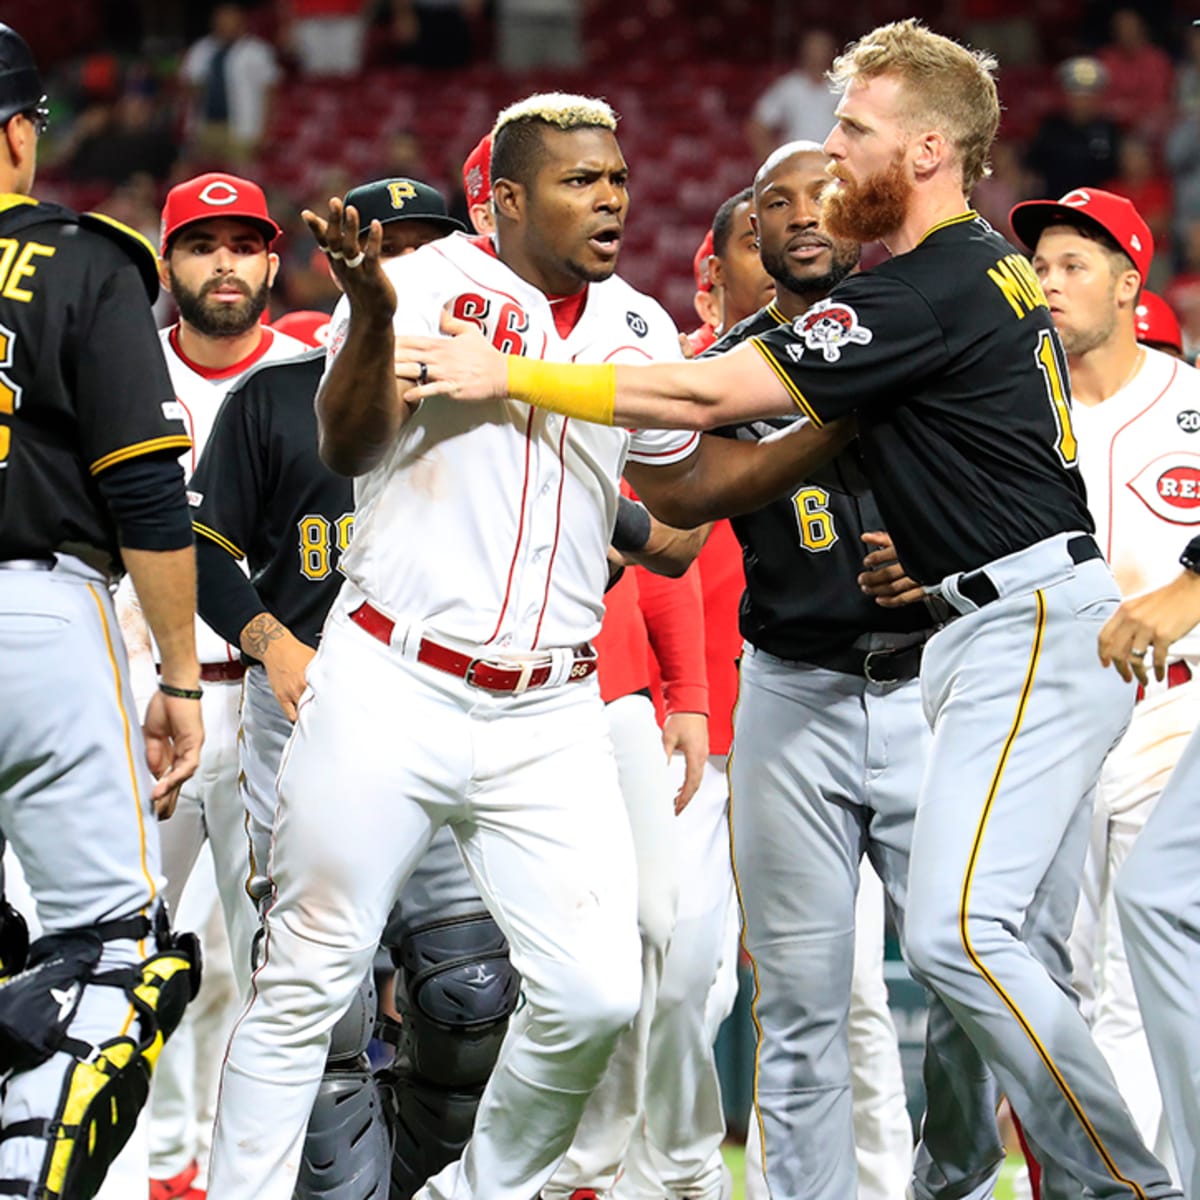 Yasiel Puig, Chris Archer suspended by MLB for roles in Reds-Pirates fight